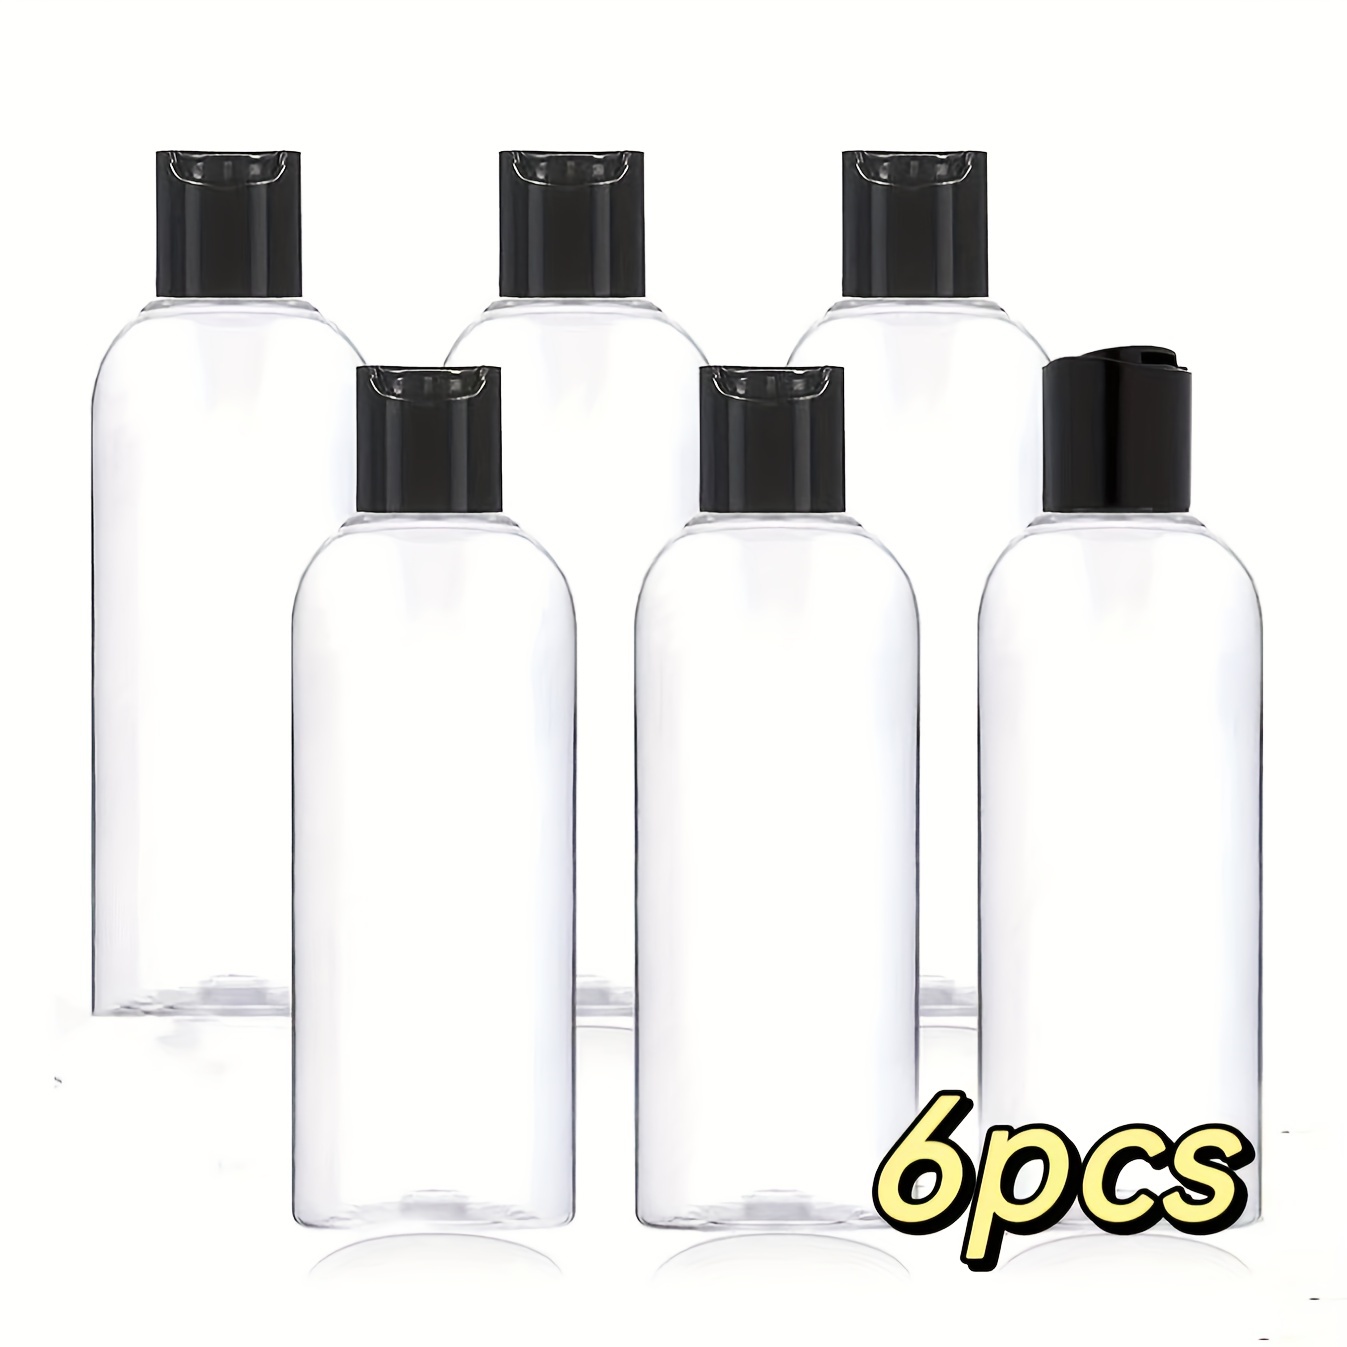 

6pcs, 3.4 Oz Clear Empty Travel Bottles With Disc 100ml Tsa Transparent Plastic Travel Size Bottles And Refillable Travel Containers For Shampoo And Lotion